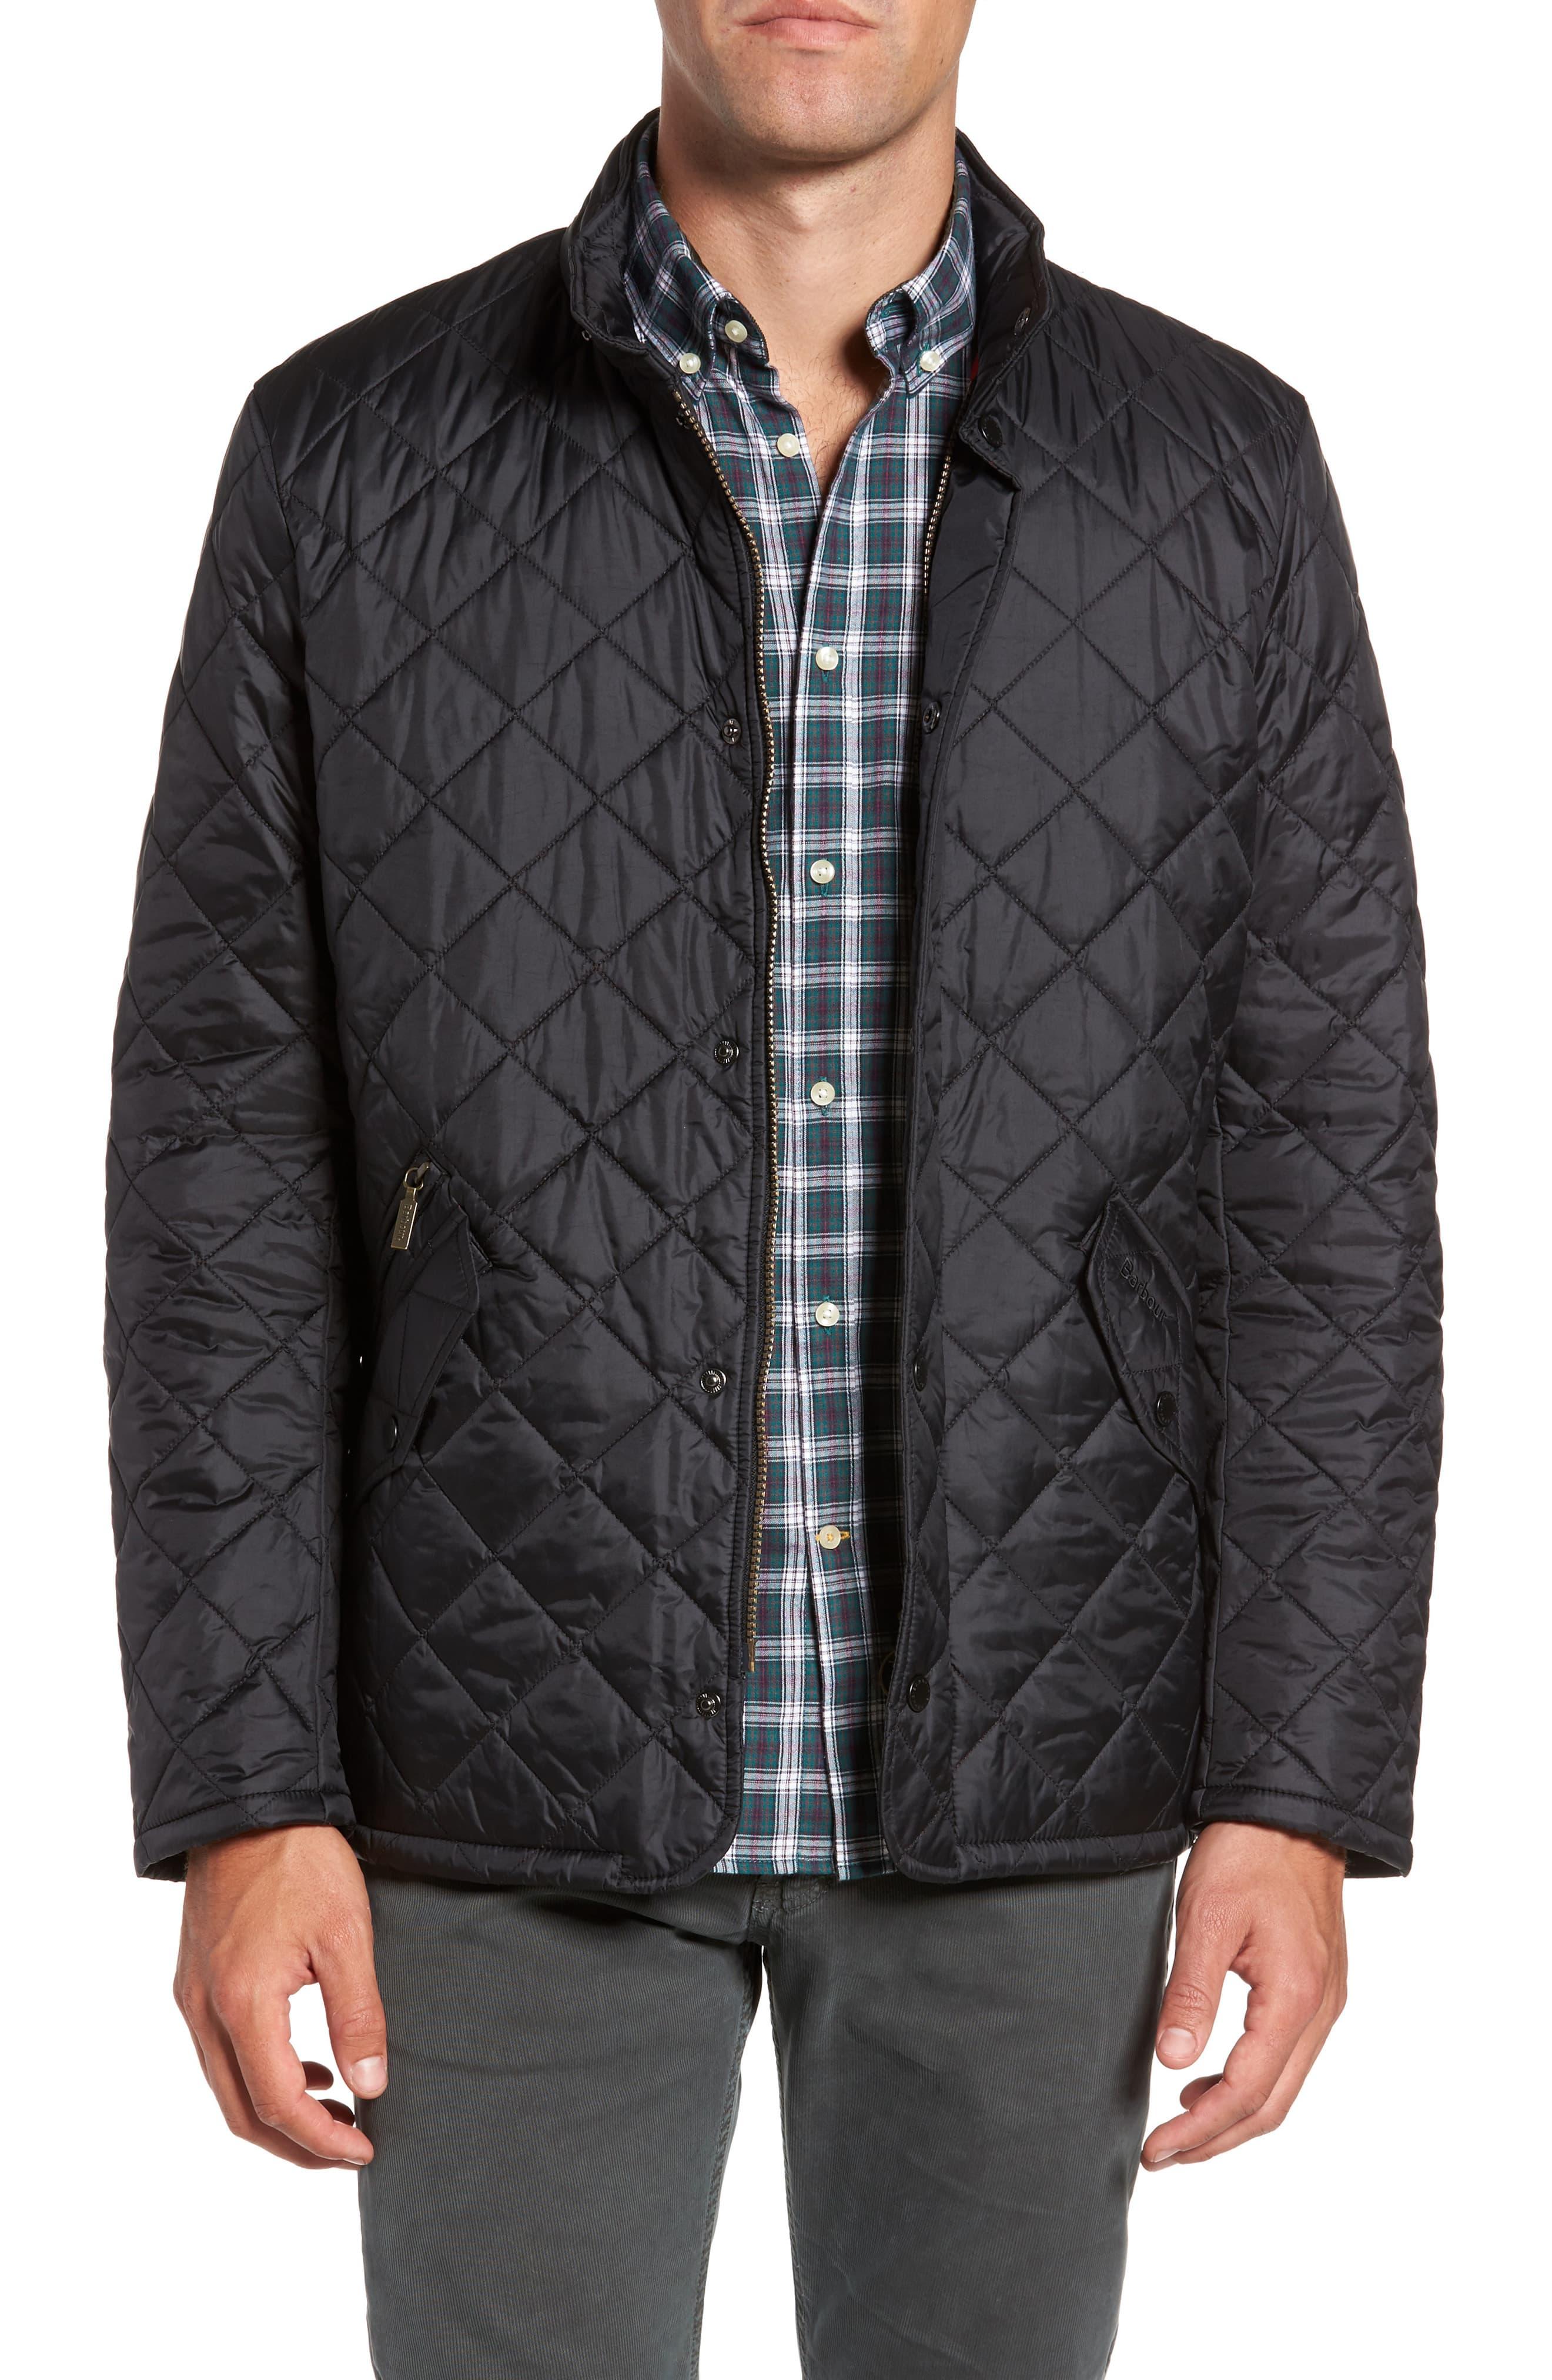 Barbour Flyweight Chelsea Quilted Jacket in Black for Men - Lyst